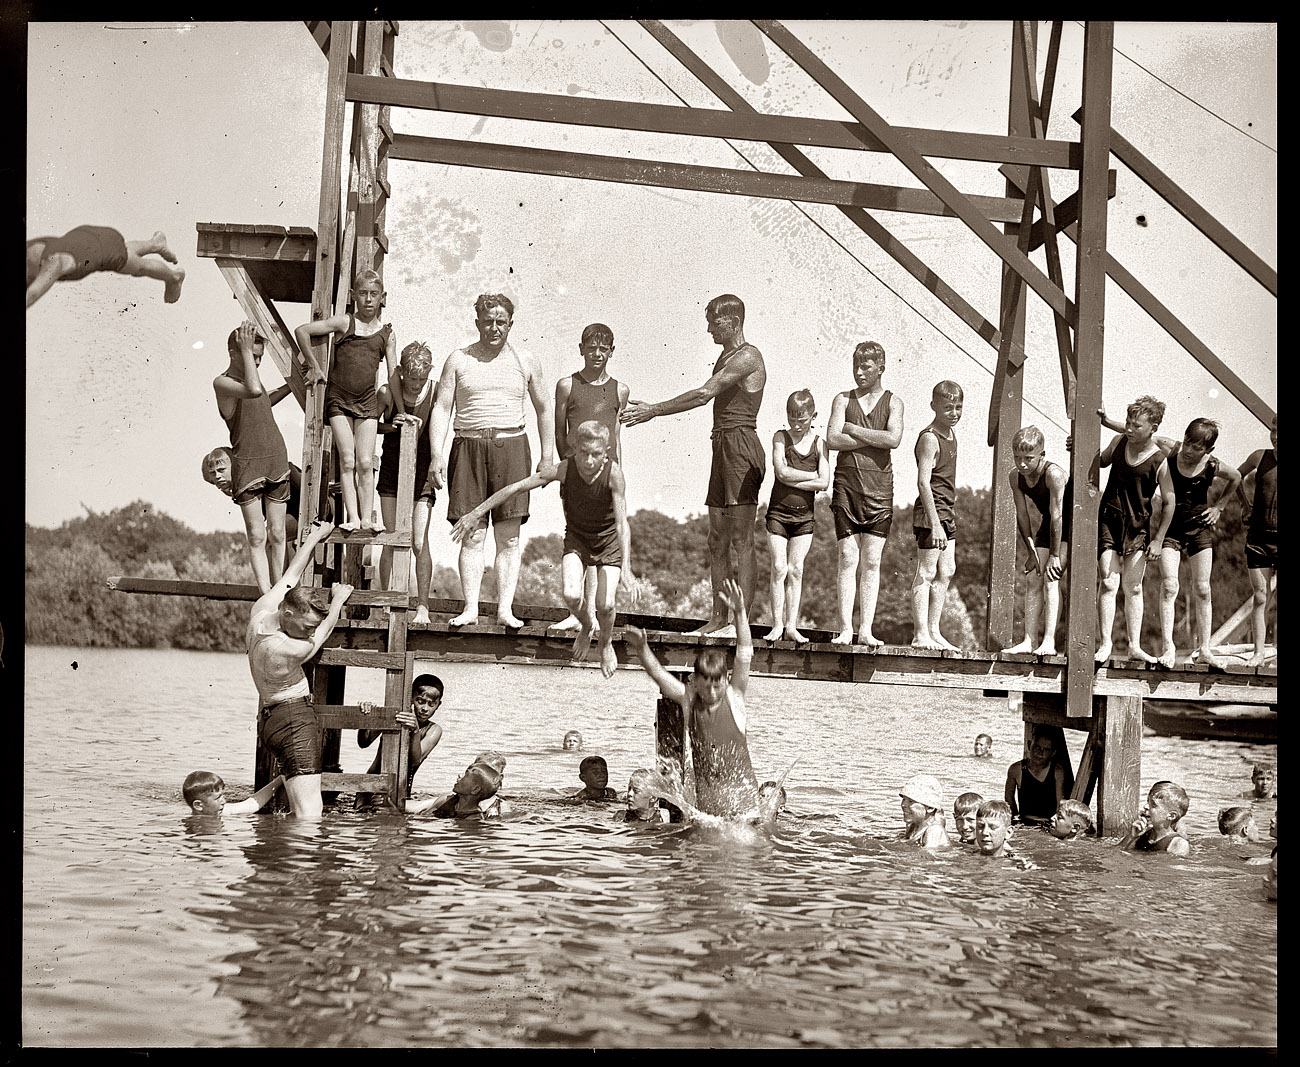 James Davis (white tank top) at Moosehead Lake in Maine in 1921. Davis, a former steelworker, was secretary of labor in the Harding, Coolidge and Hoover administrations and later represented Pennsylvania in the Senate. He also wrote "The Iron Puddler." National Photo Company Collection. View full size.
